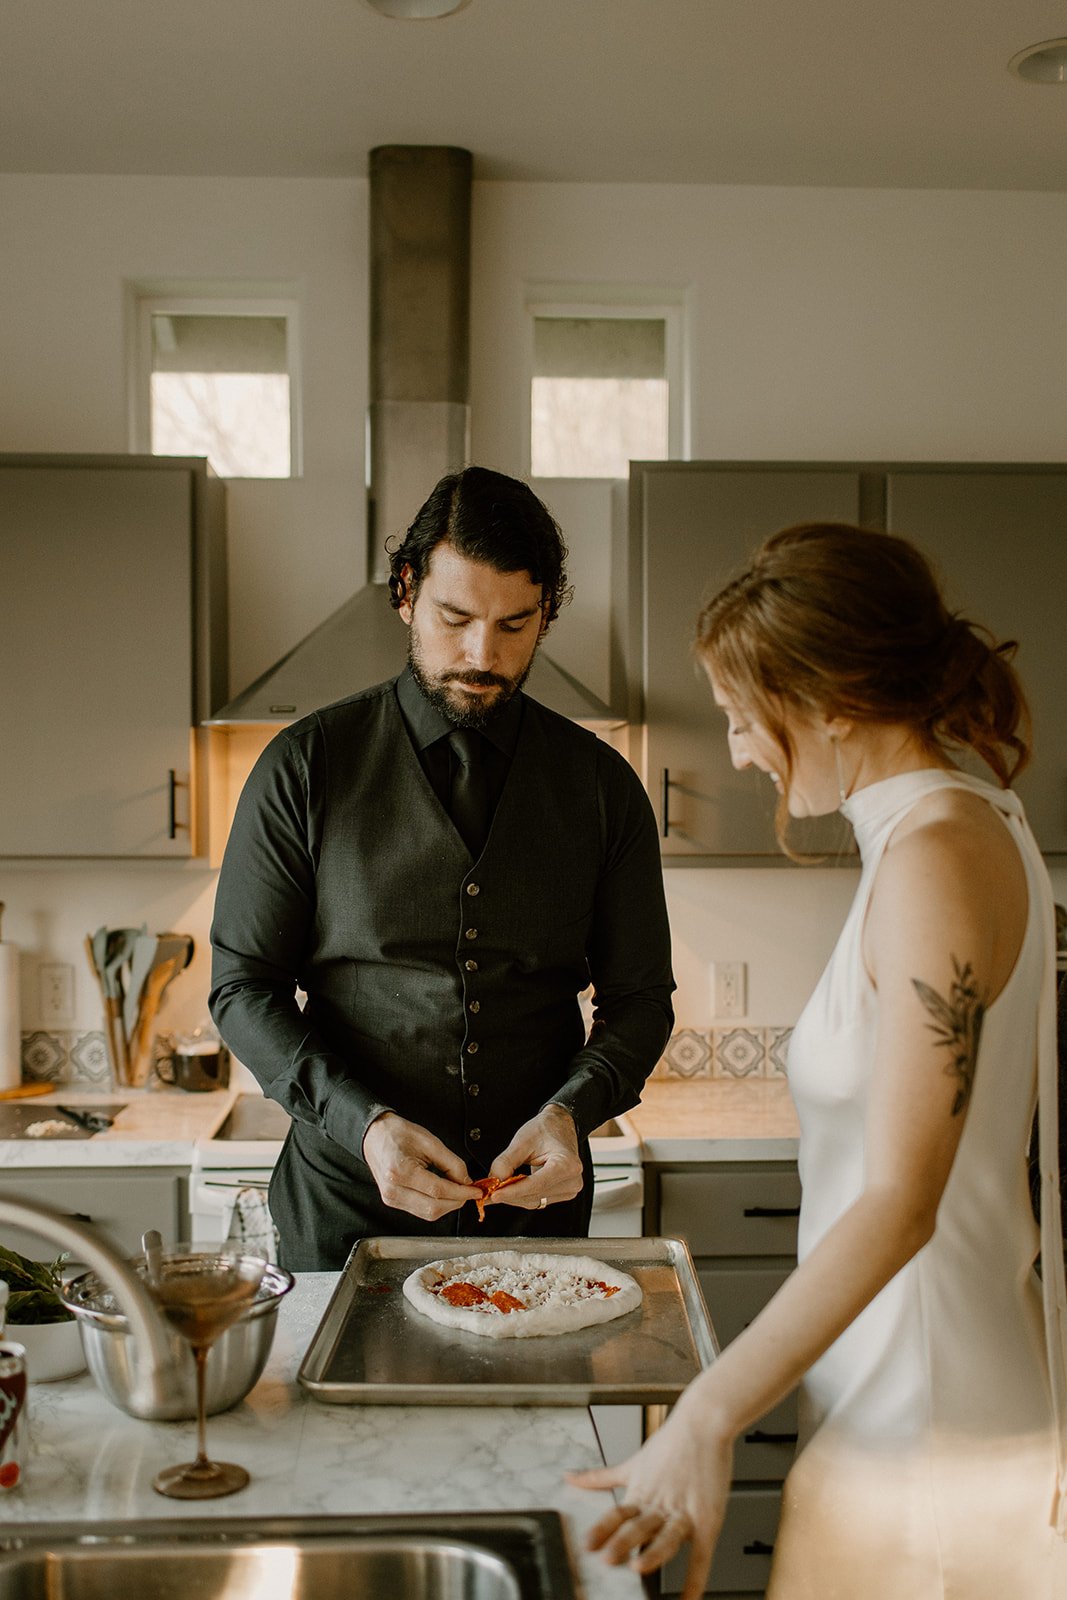 Groom in his wedding attire putting pepperoni on a pizza in the kitchen of their Airbnb while the bride watches in her wedding dress